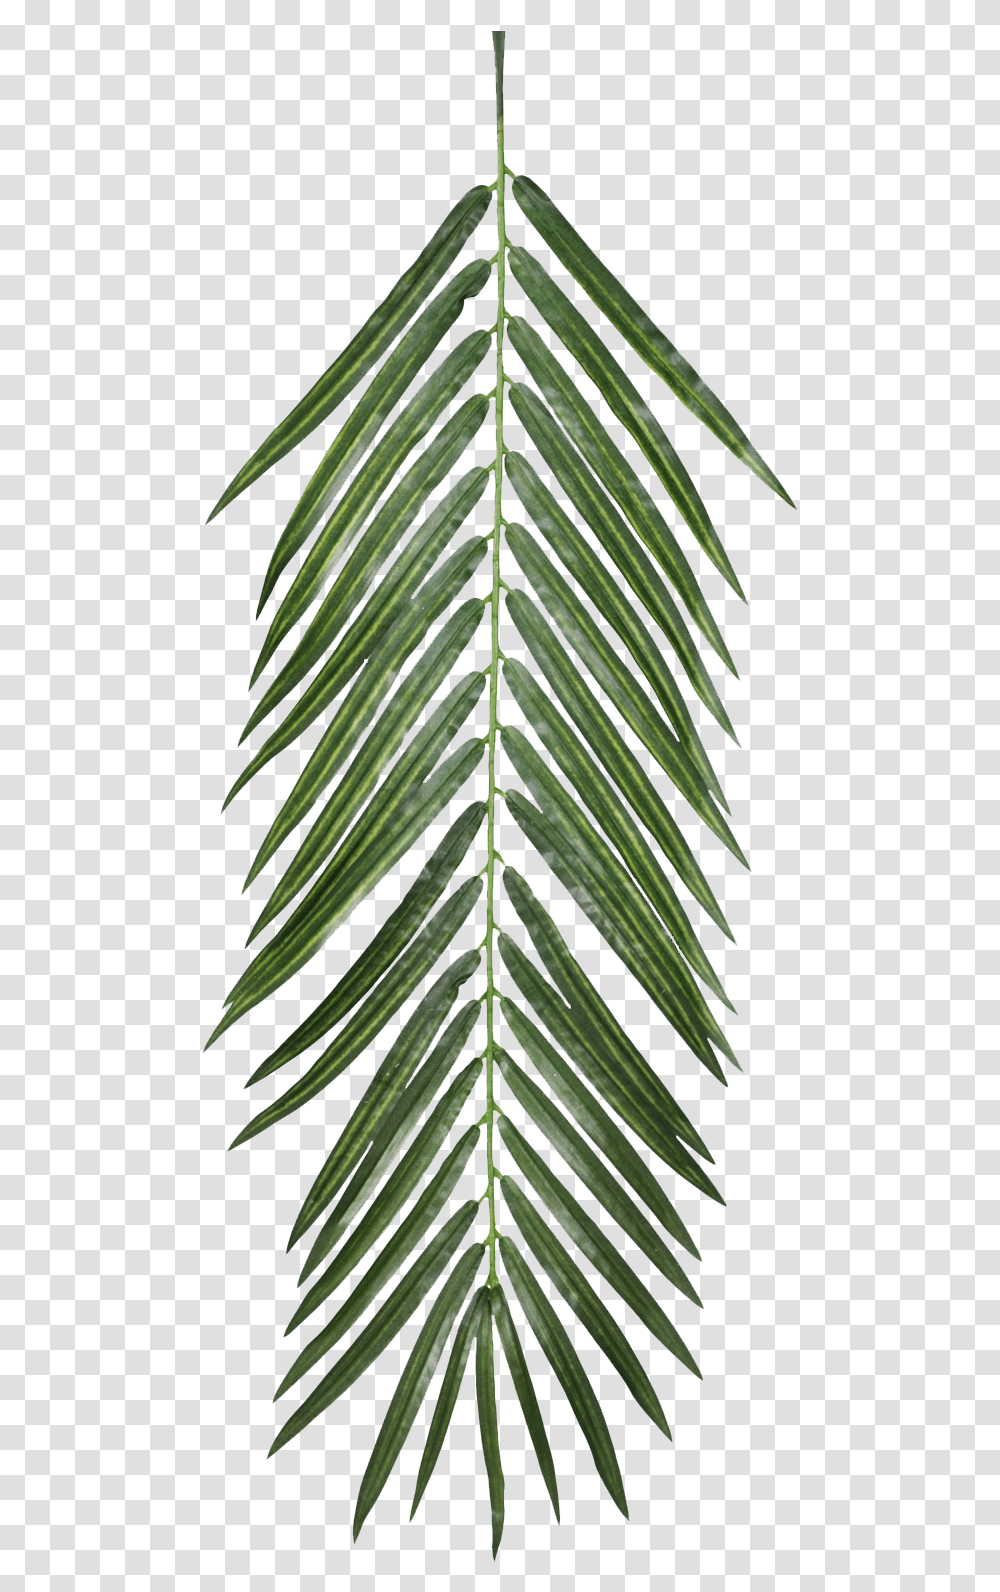 Download The Texture Of Foliage Palm Leaf Free Texture Drawing Of Palm Trees Aesthetic, Plant, Pineapple, Fruit, Food Transparent Png